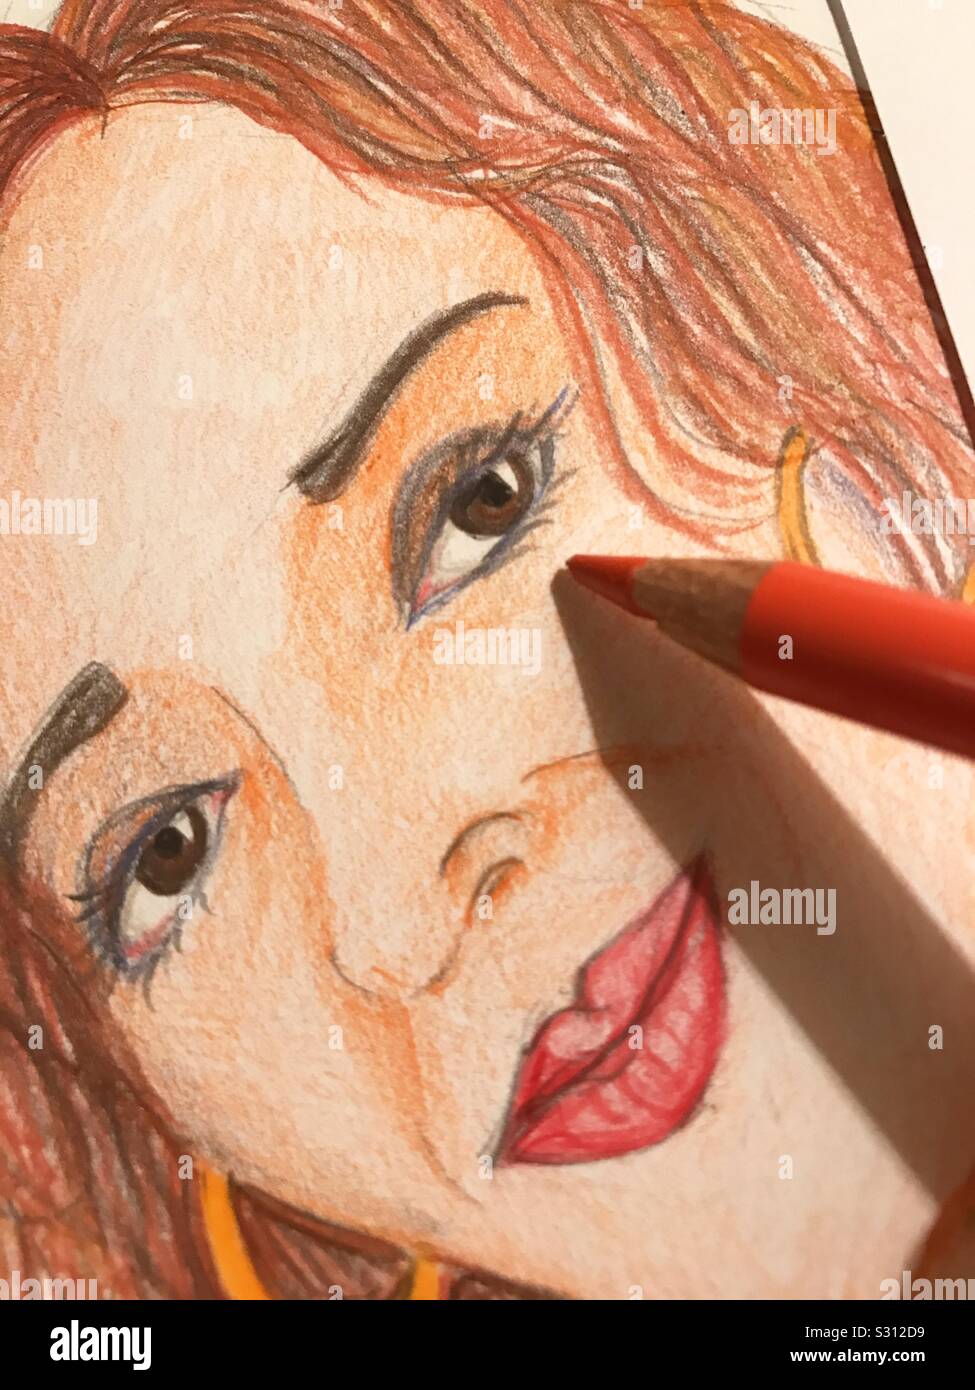 Red pencil colouring face. Illustration. Stock Photo